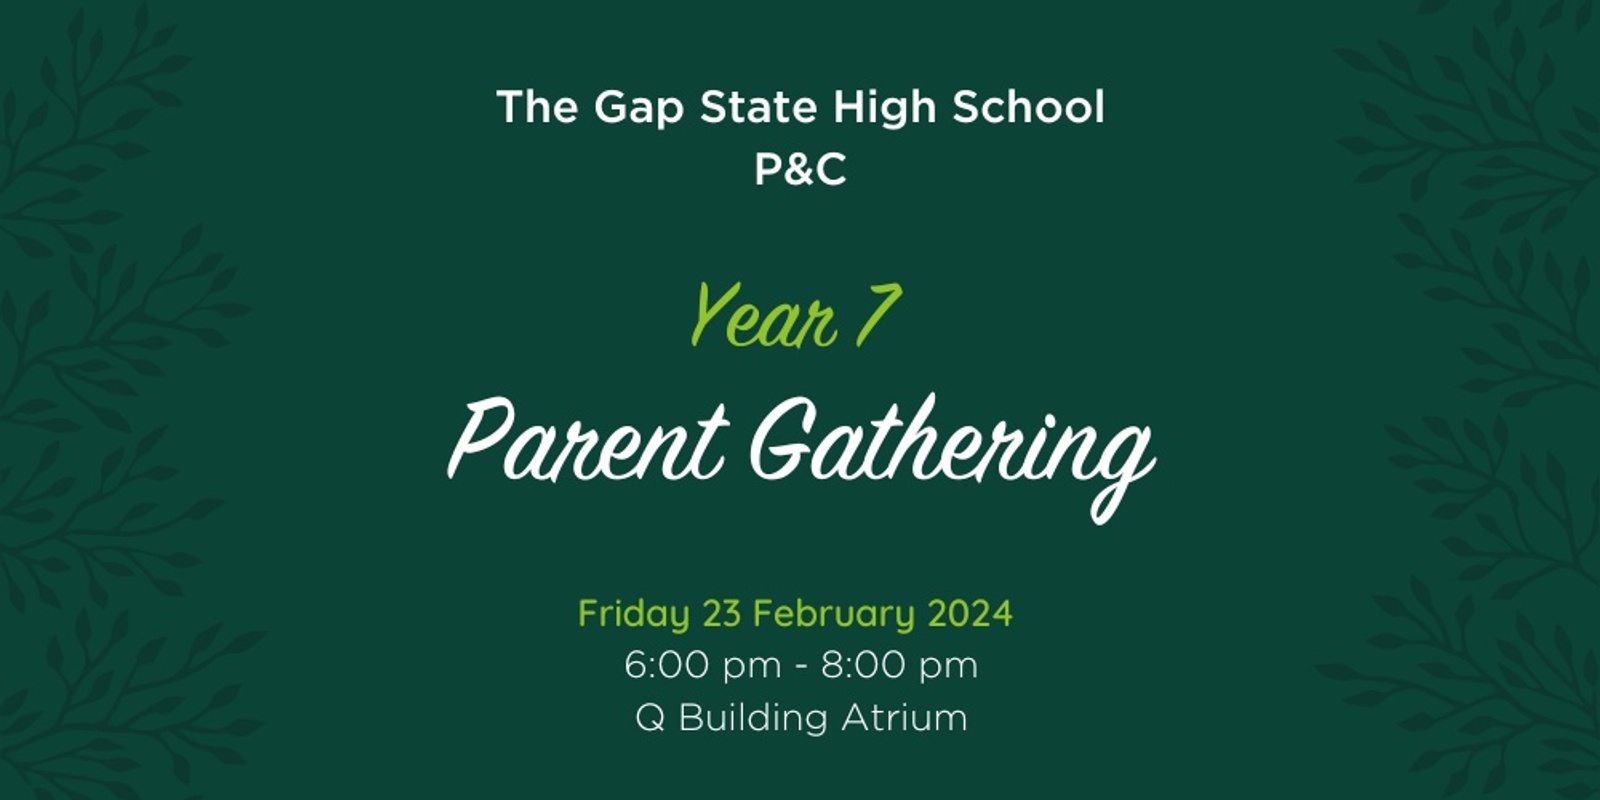 Banner image for Year 7 Parent Gathering